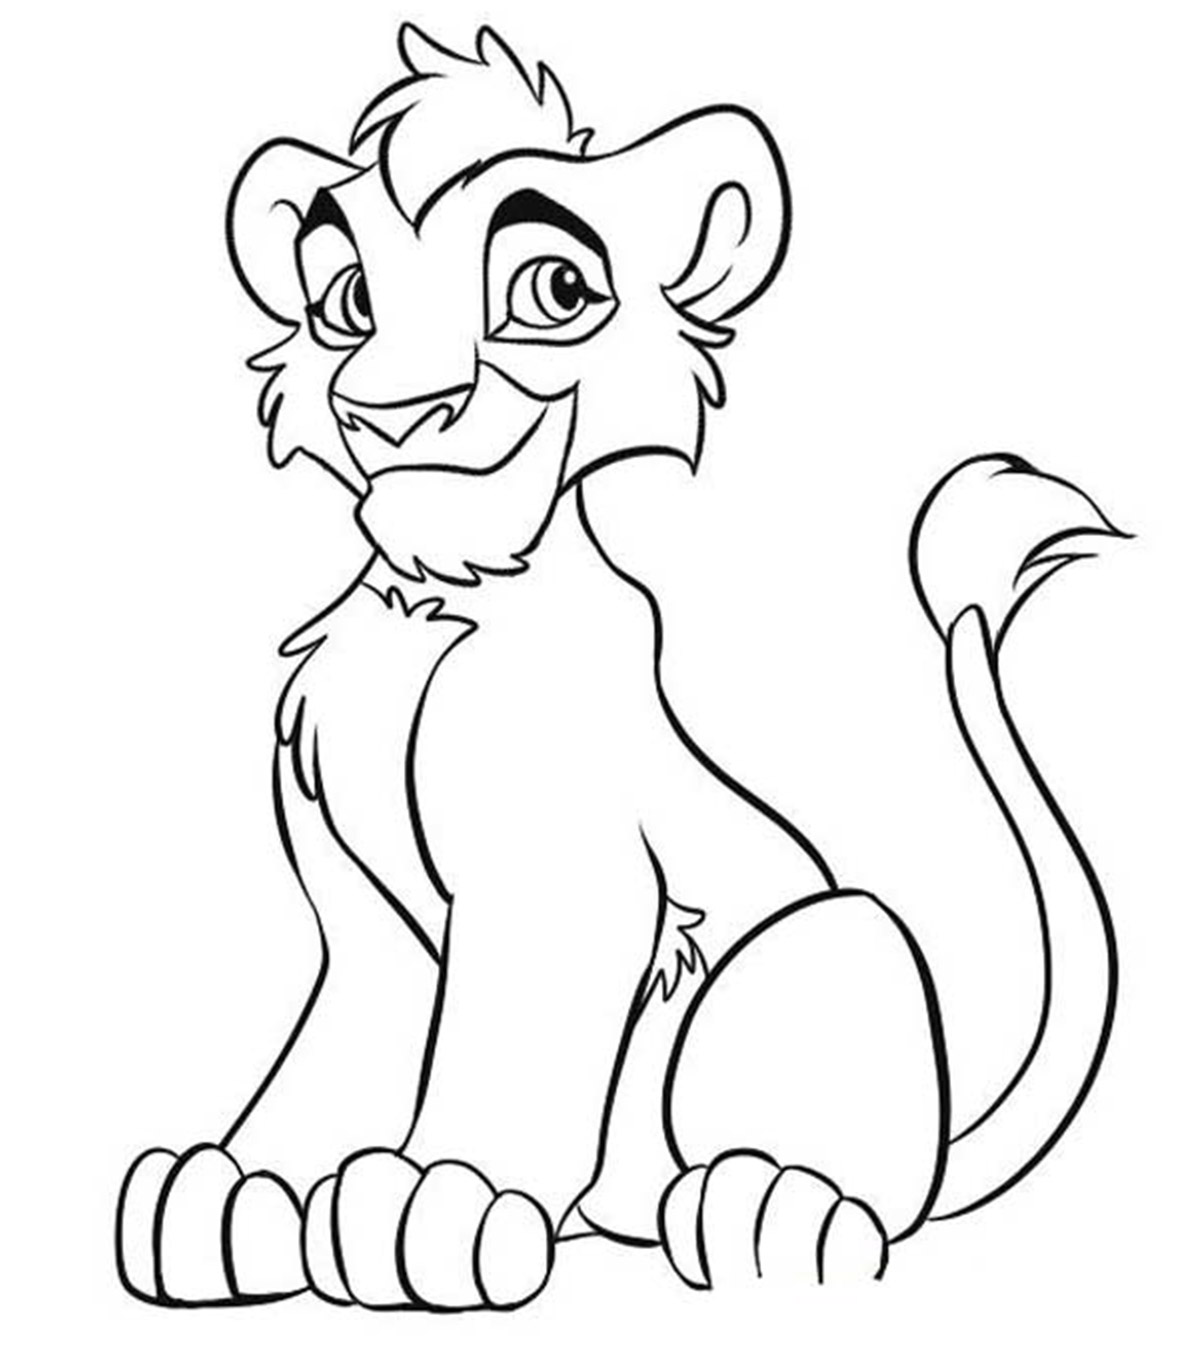 Scar Coloring Pages - Coloring Home